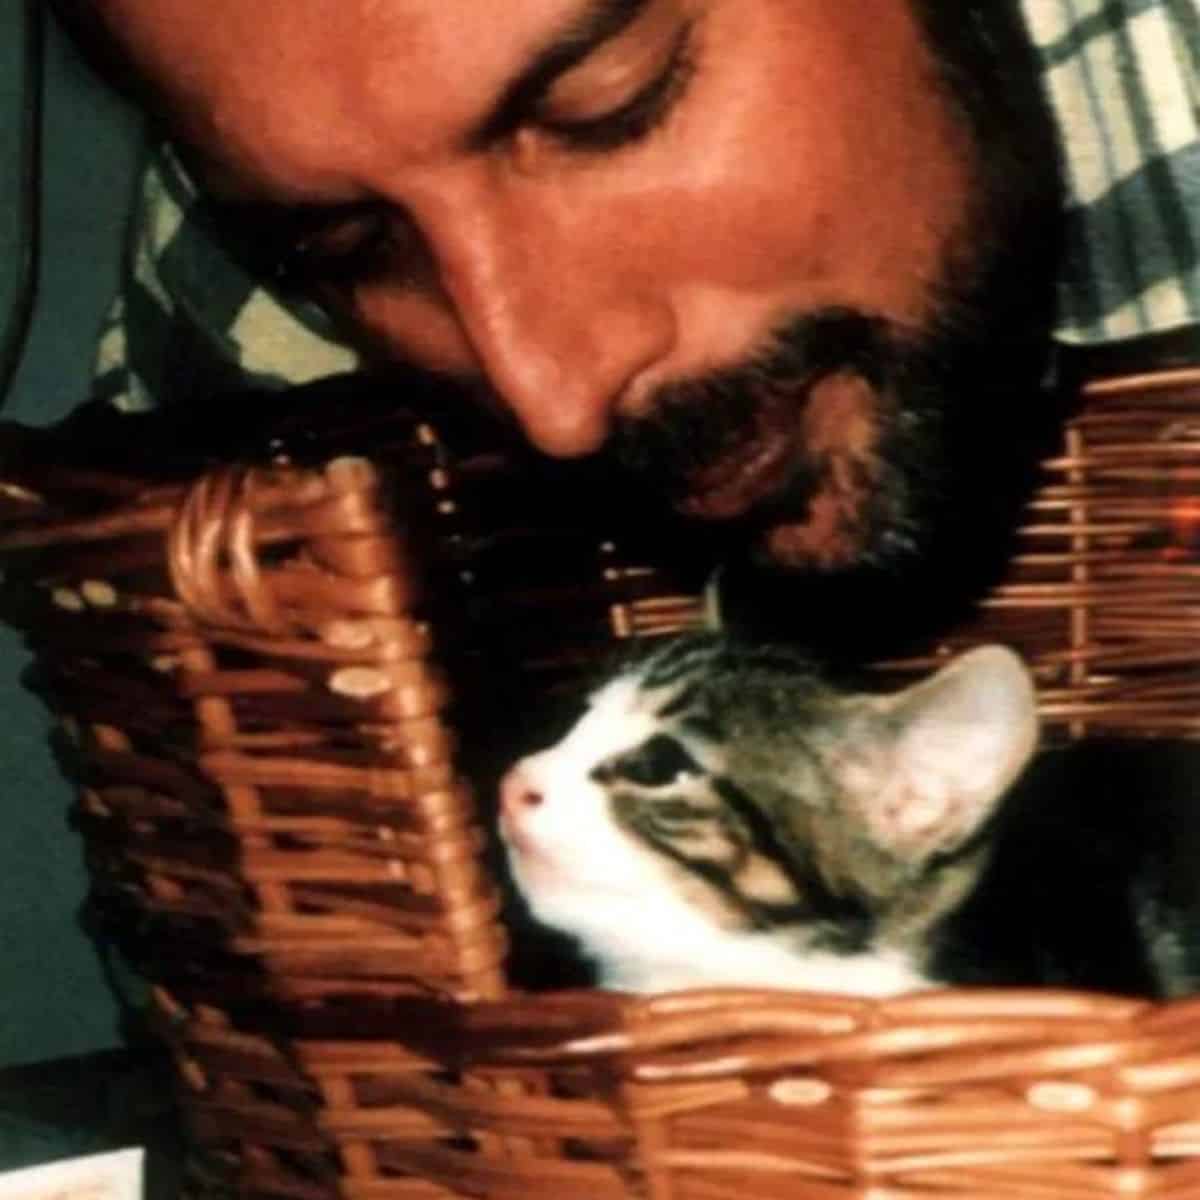 close-up photo of freddie leaning towards the cat